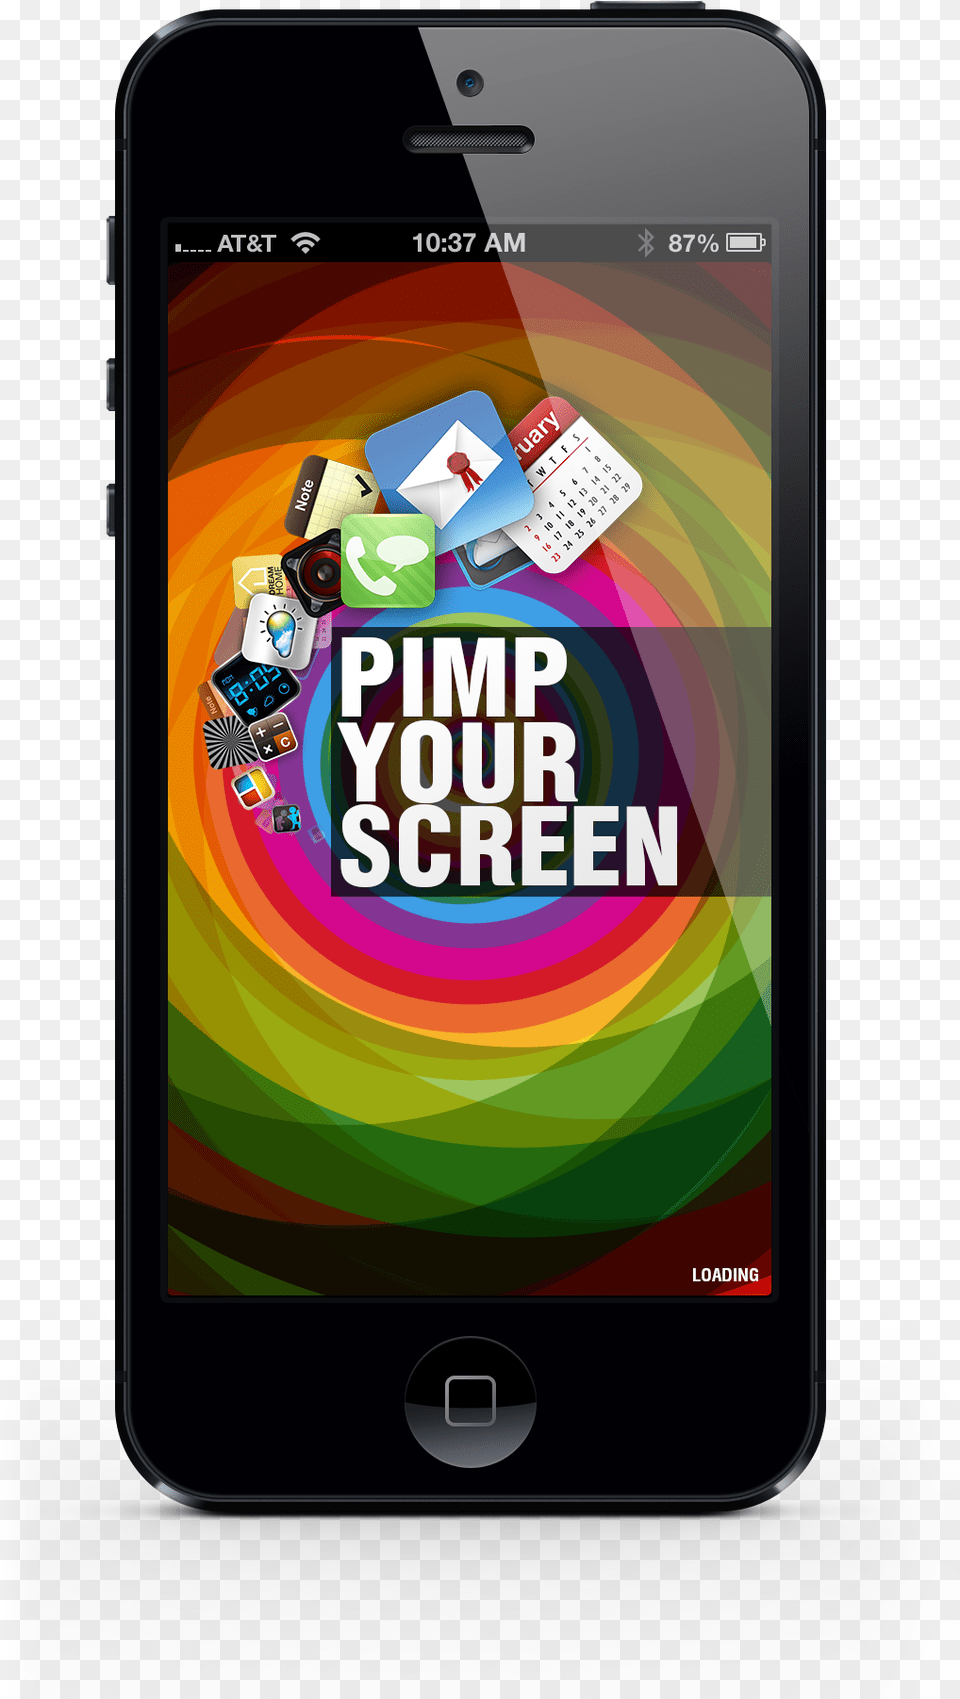 Pimp Your Screen Whatsapp Iphone 5, Electronics, Mobile Phone, Phone Png Image